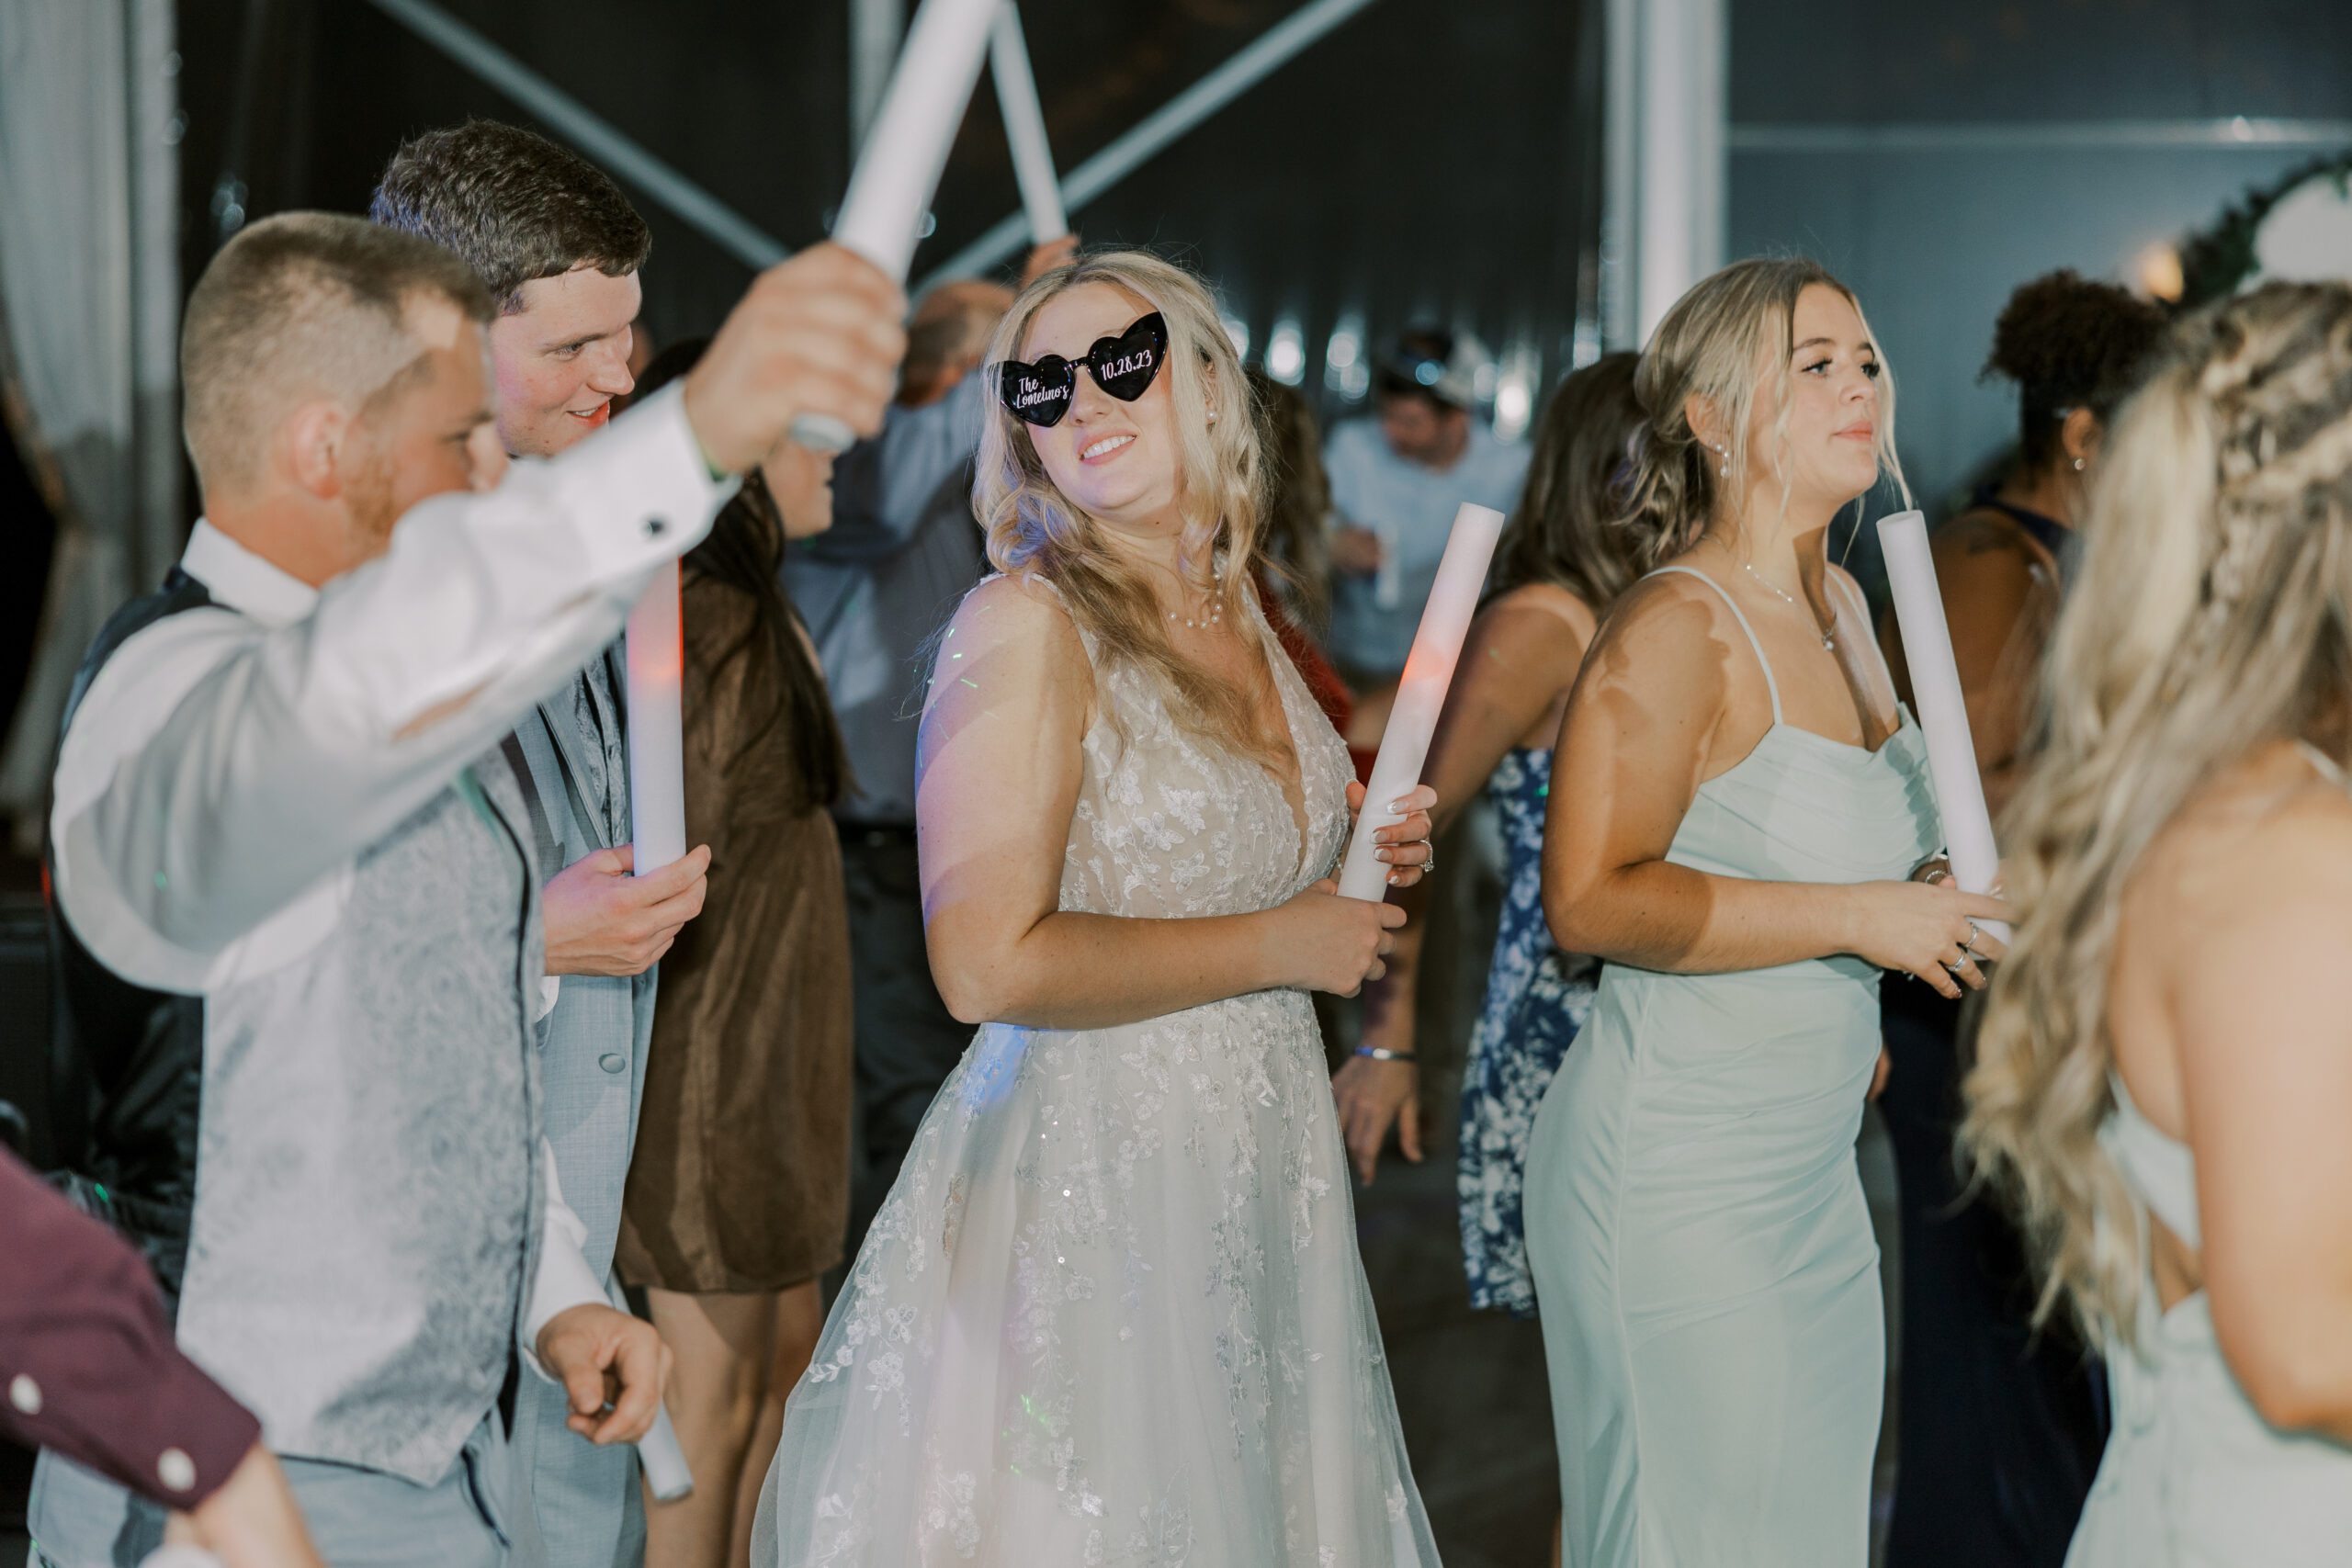 Bride wearing heart shaped sunglasses with her new last name and wedding date written on them, holding a light up baton and dancing alongside other guests